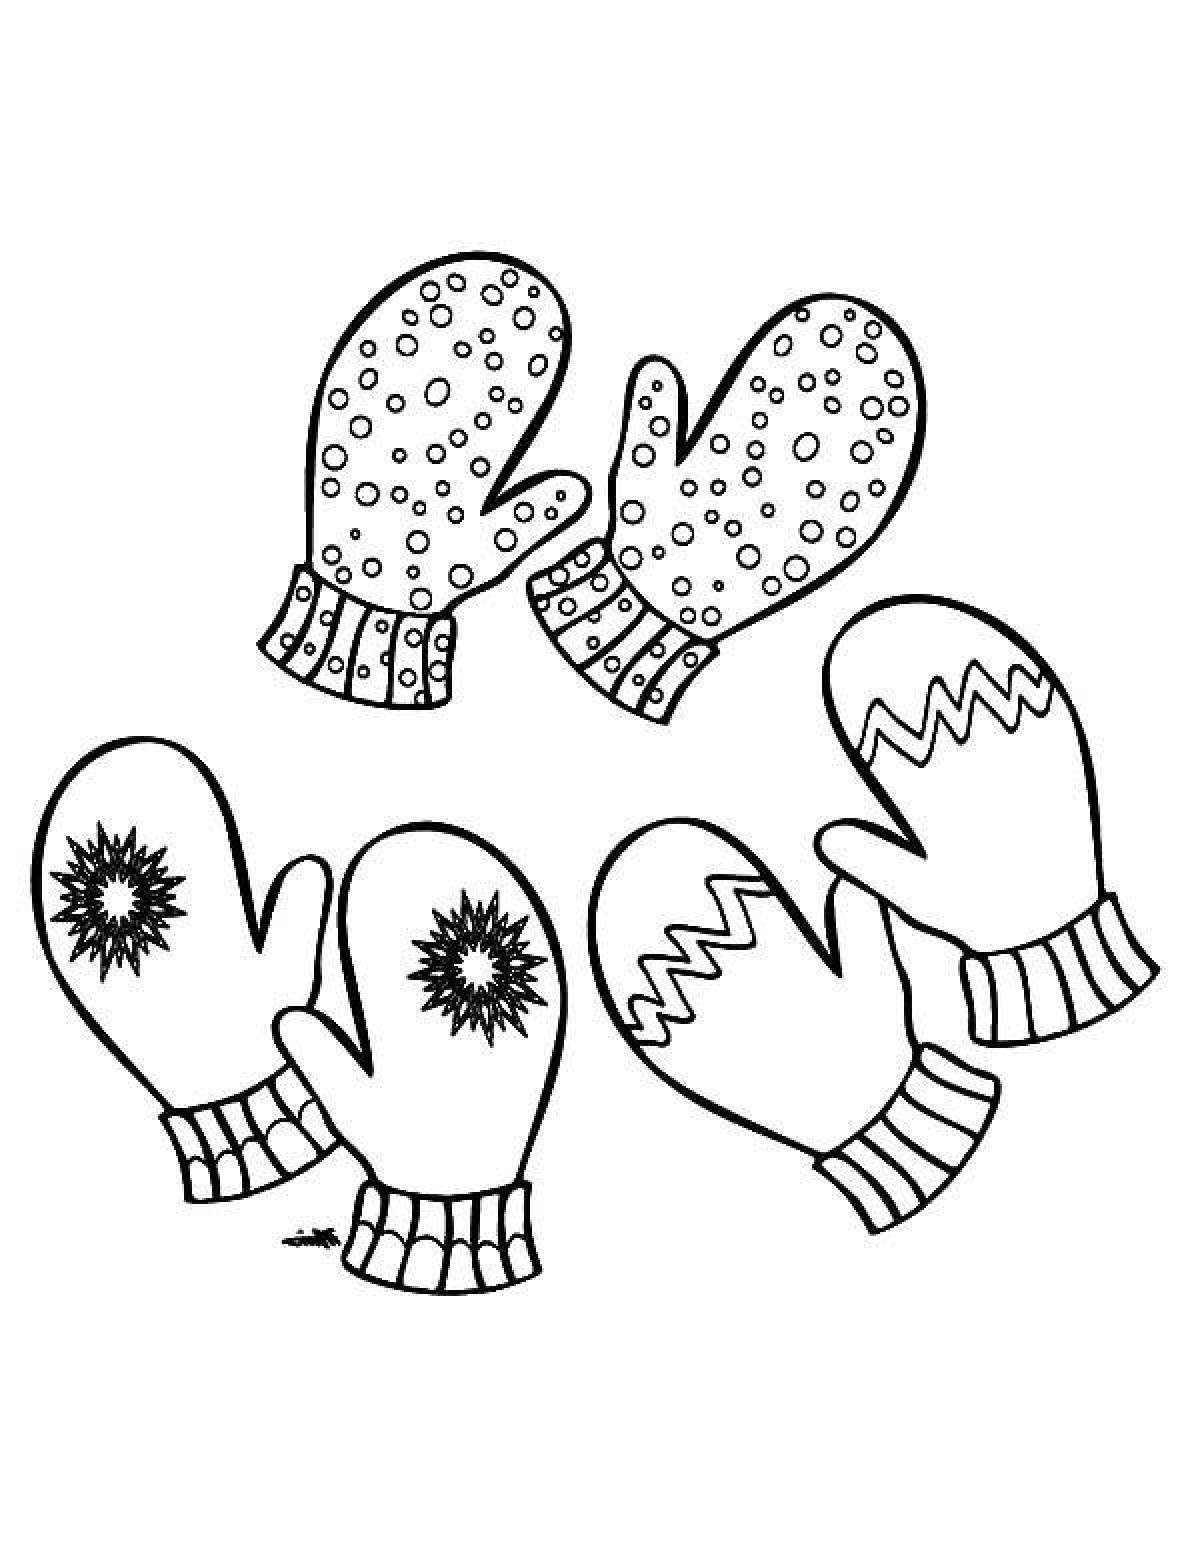 Glitter mittens coloring page